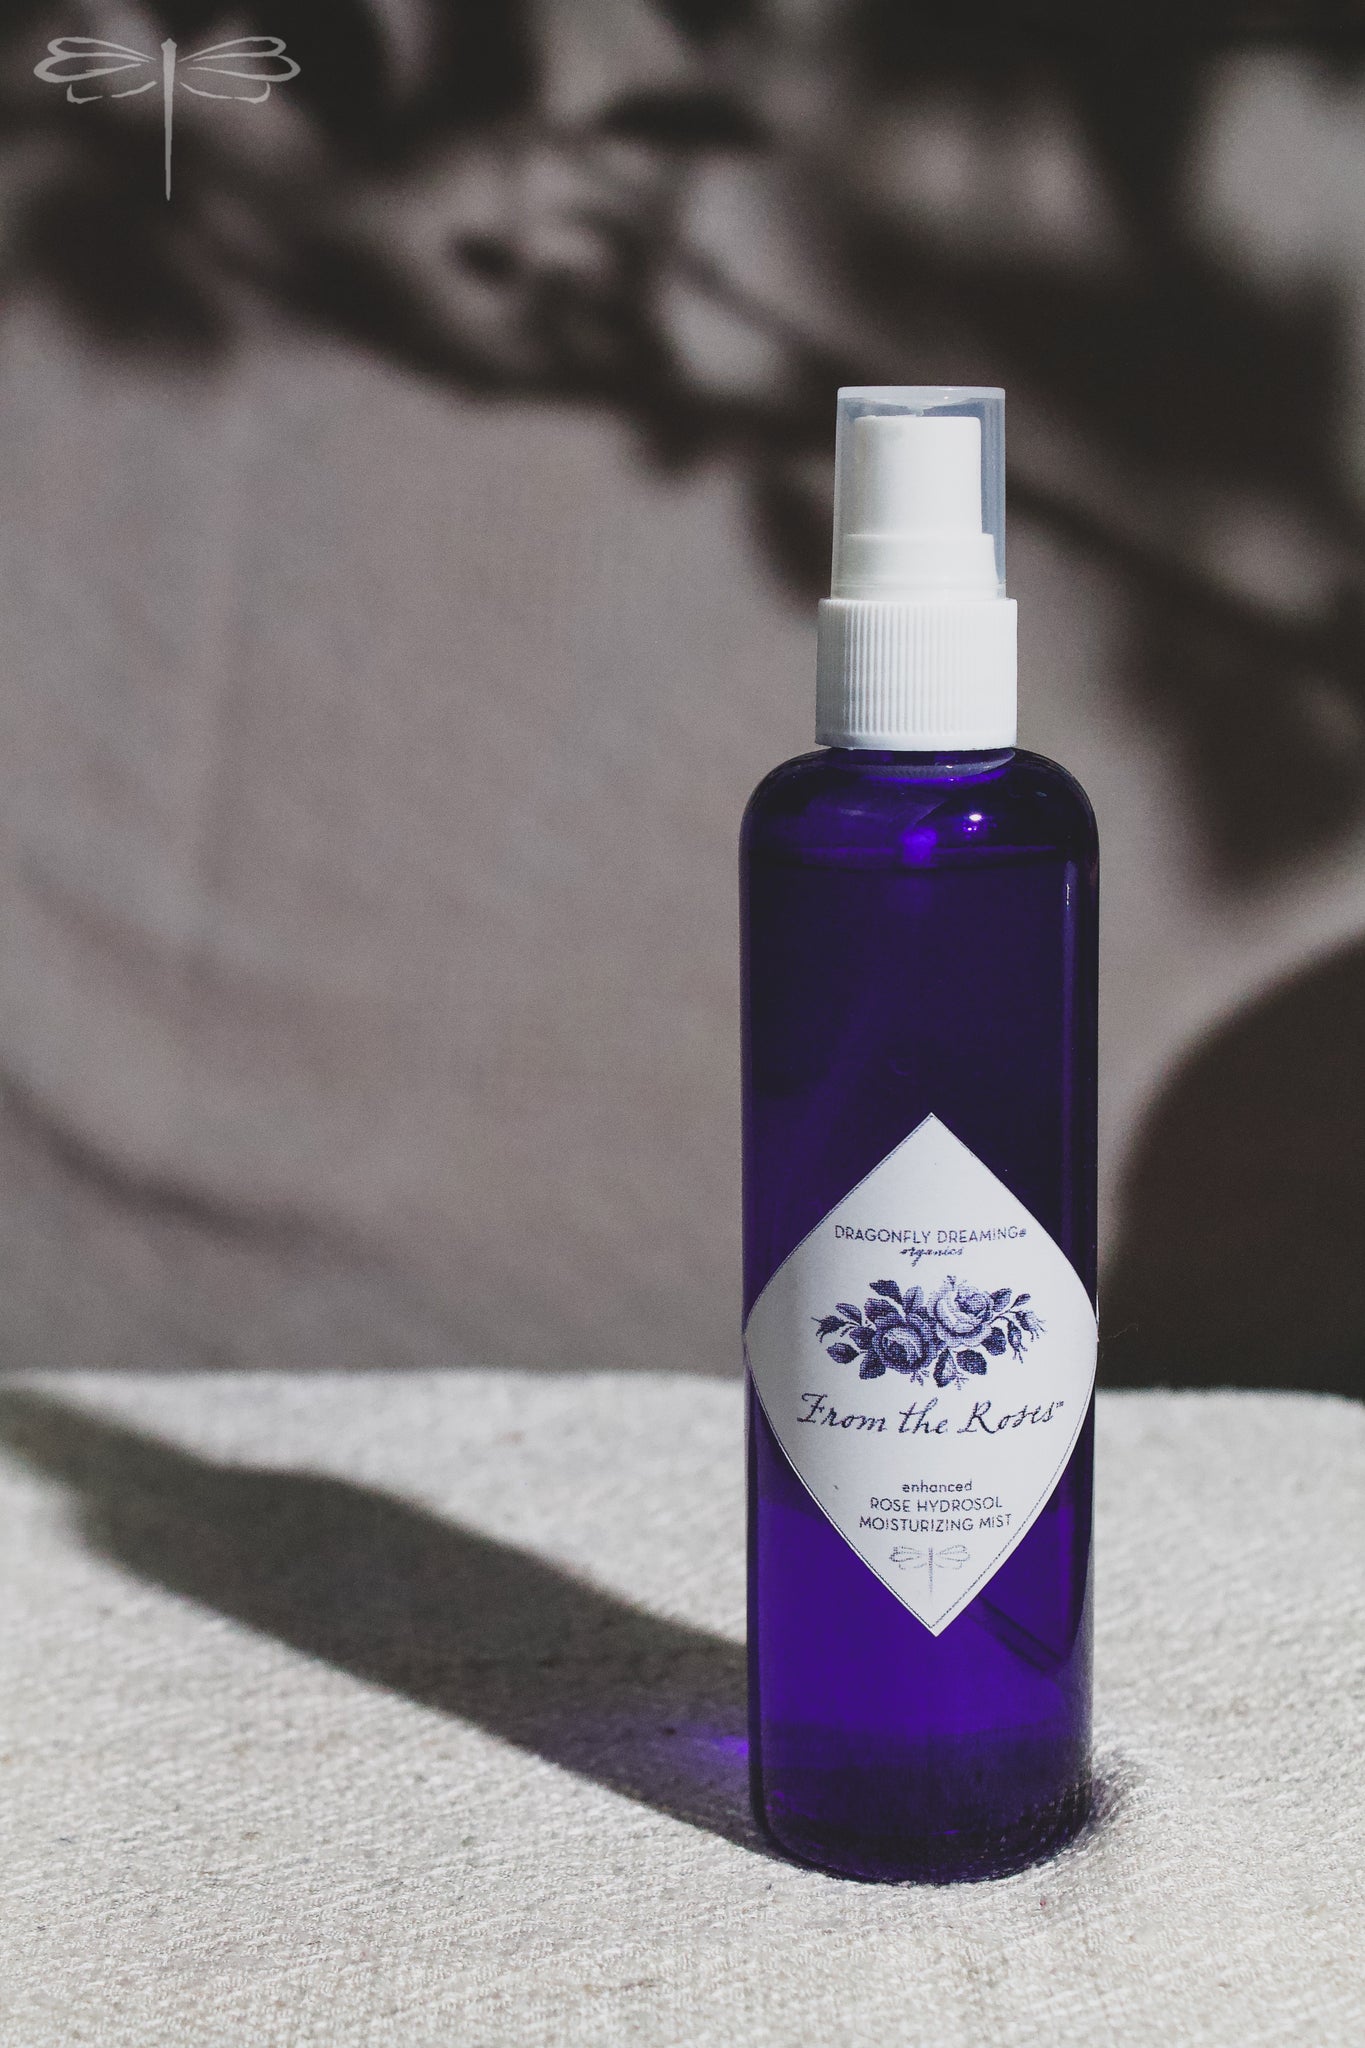 Pictured here, From the Roses Moisturizing Mist - Enhanced, by Dragonfly Dreaming Organics